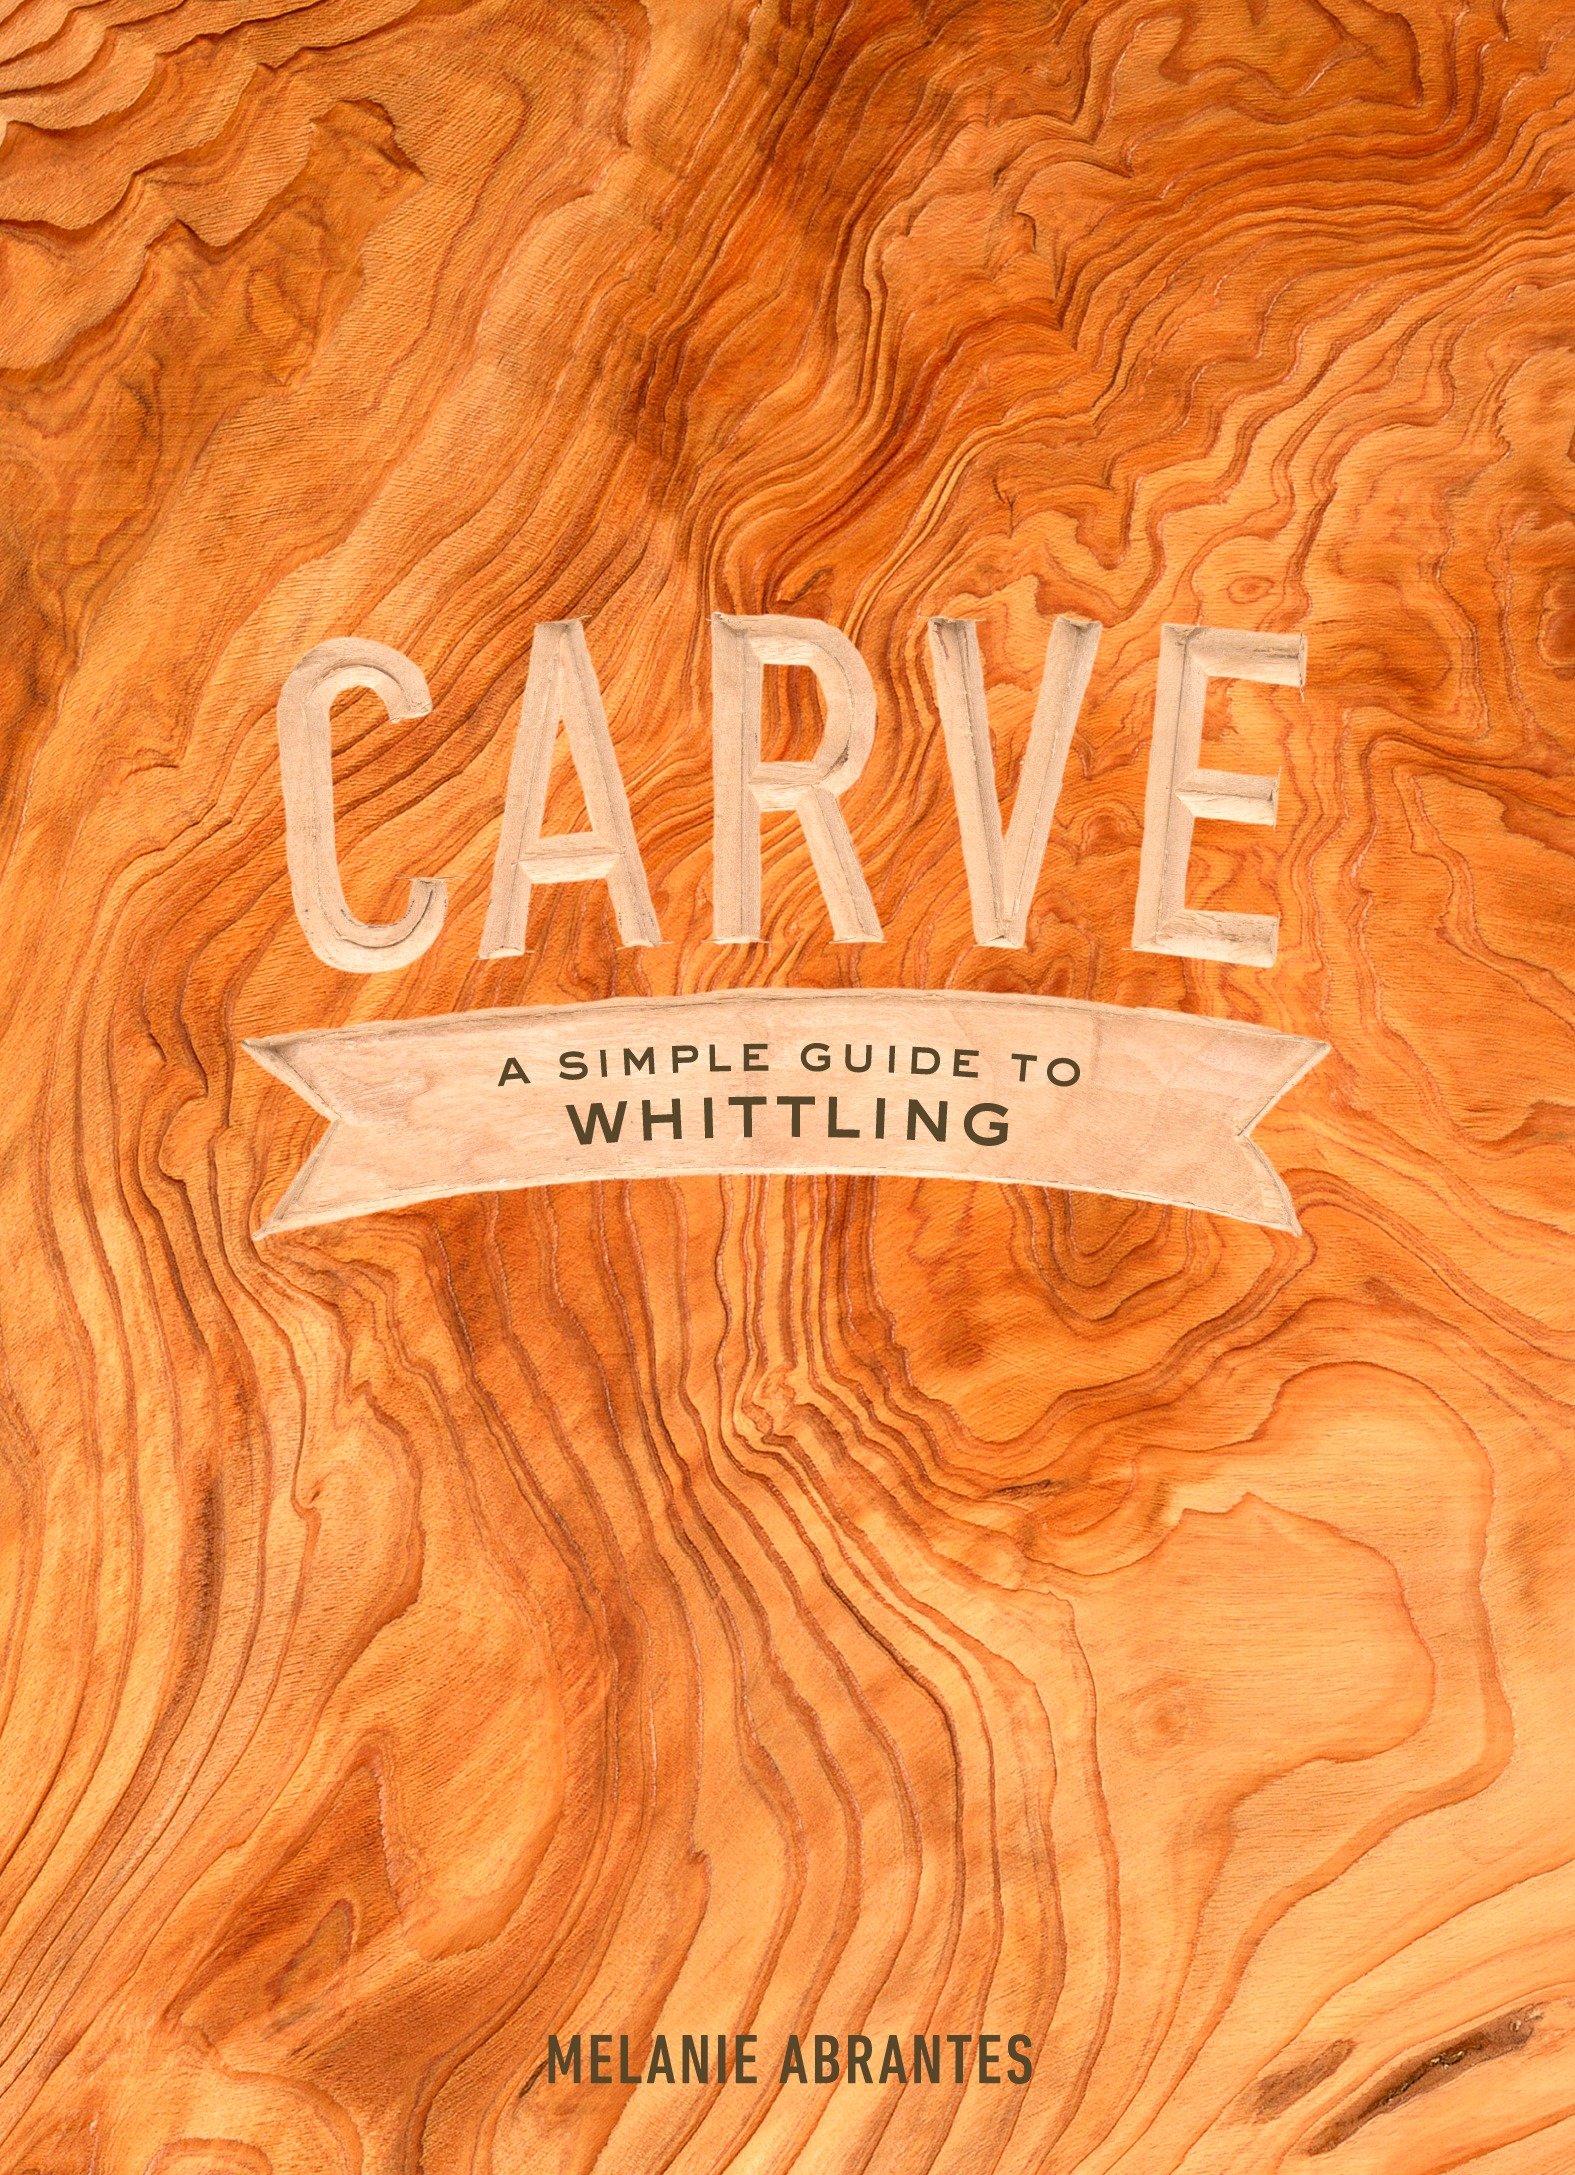 Carve: A Simple Guide To Whittling (Hardcover Book)